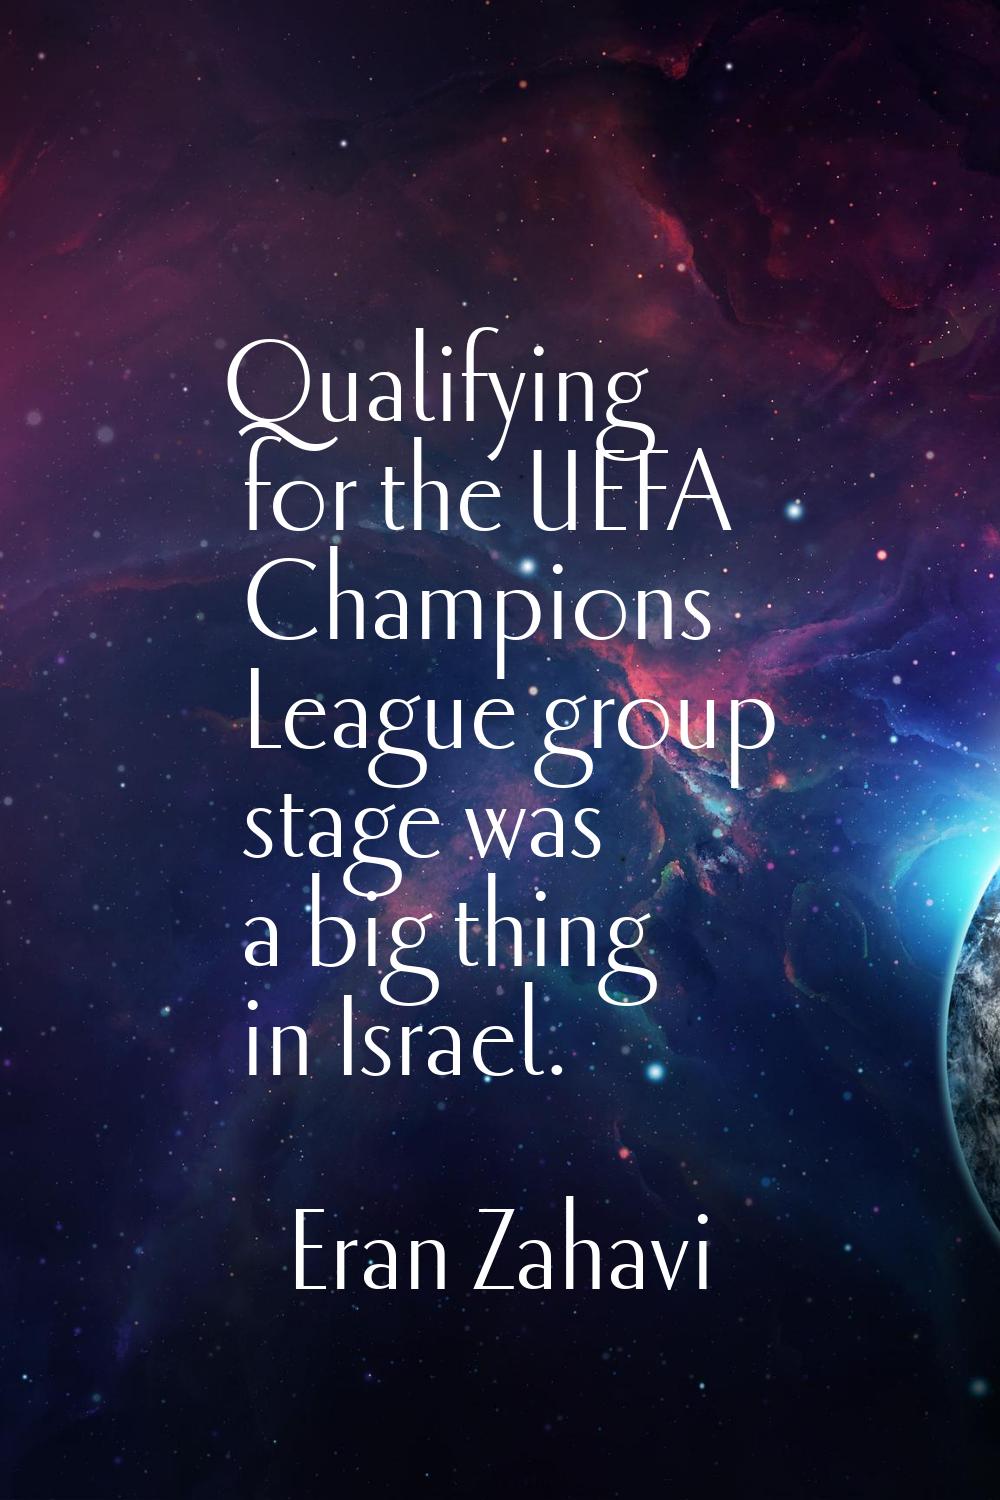 Qualifying for the UEFA Champions League group stage was a big thing in Israel.